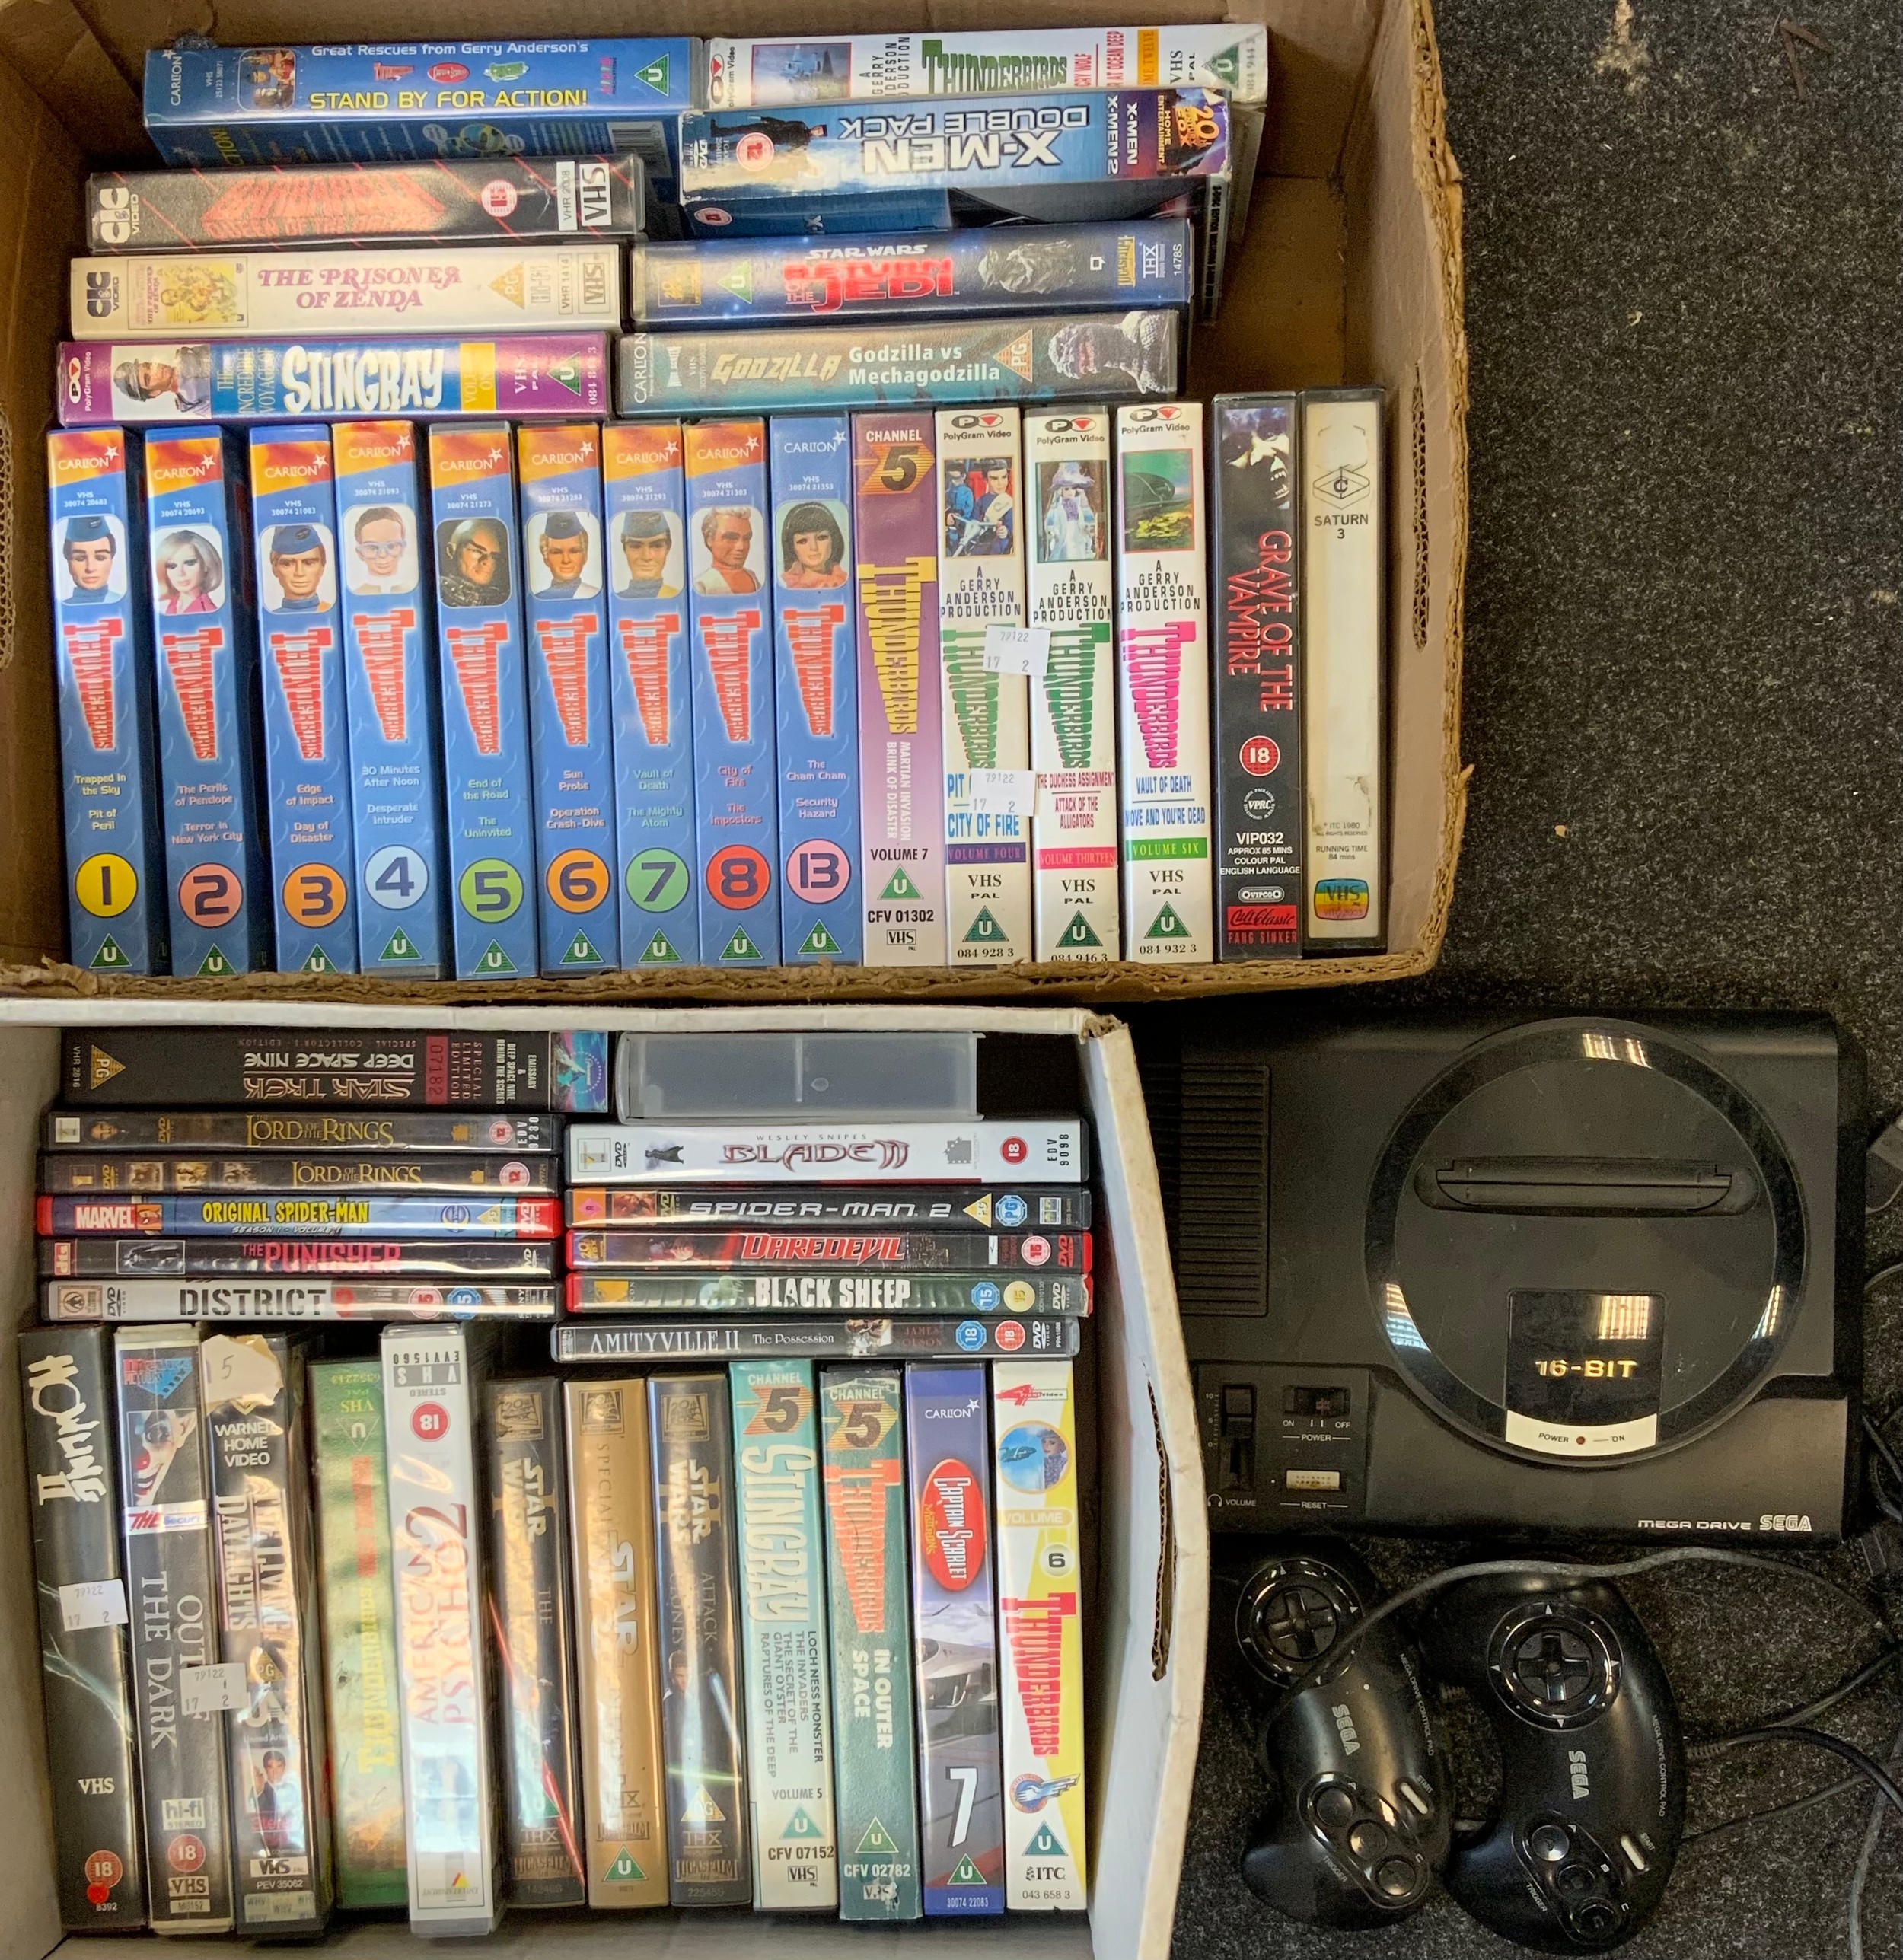 Sega Megadrive 1 MK1 Console with controllers; Thunderbird VHS videos; Star Wars VHS; DVD - Lord